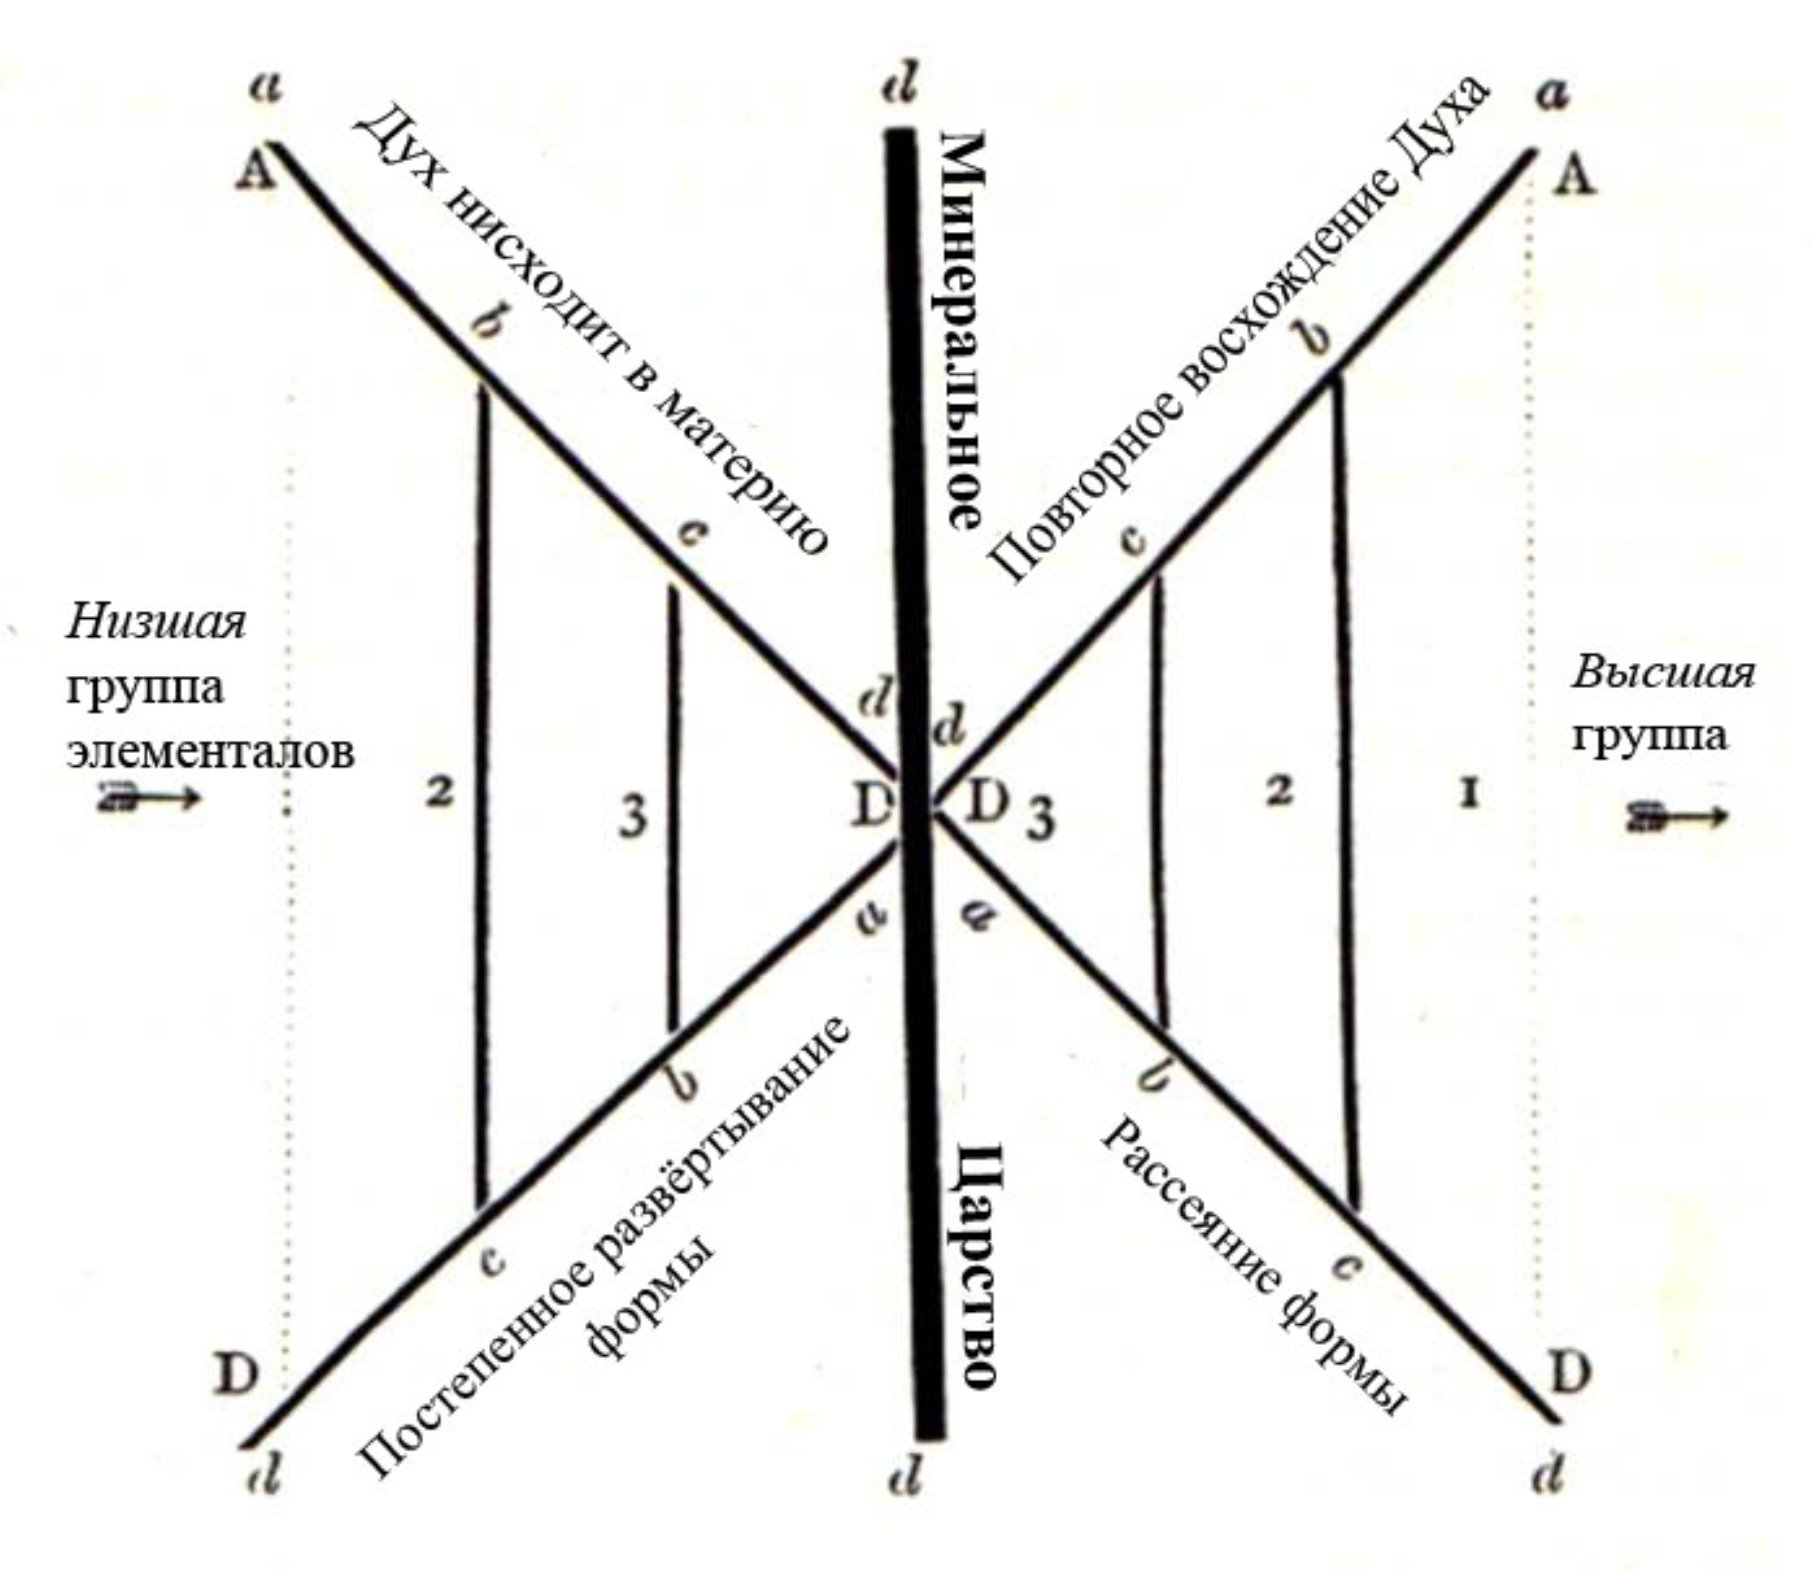 five_years_of_theosophy_Russian-diagram